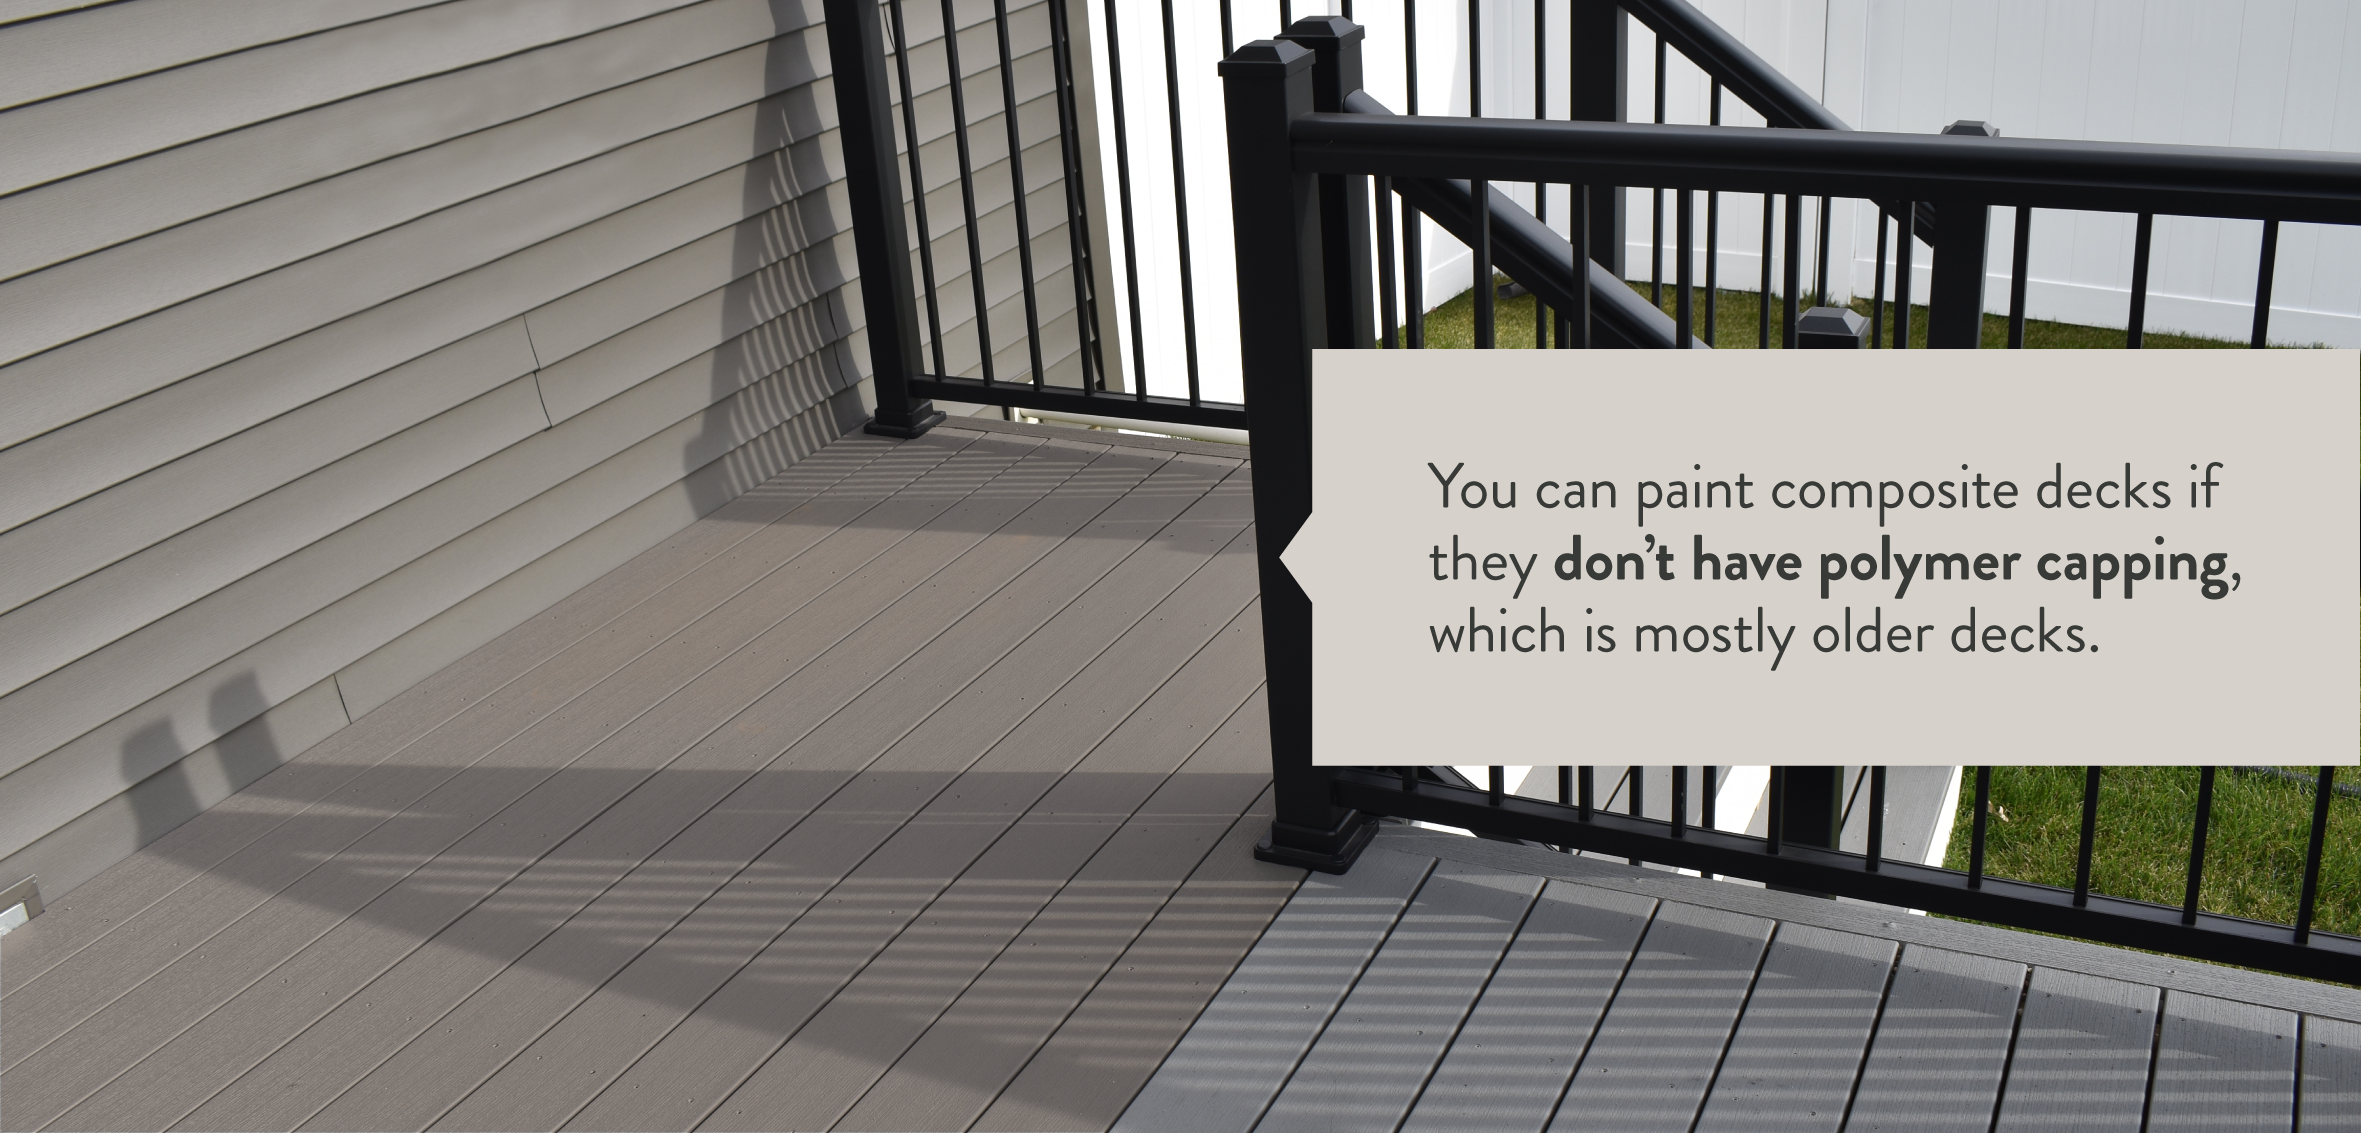 A cool gray deck with black railing is partially painted with the text "You can paint composite decks if they don't have polymer capping."